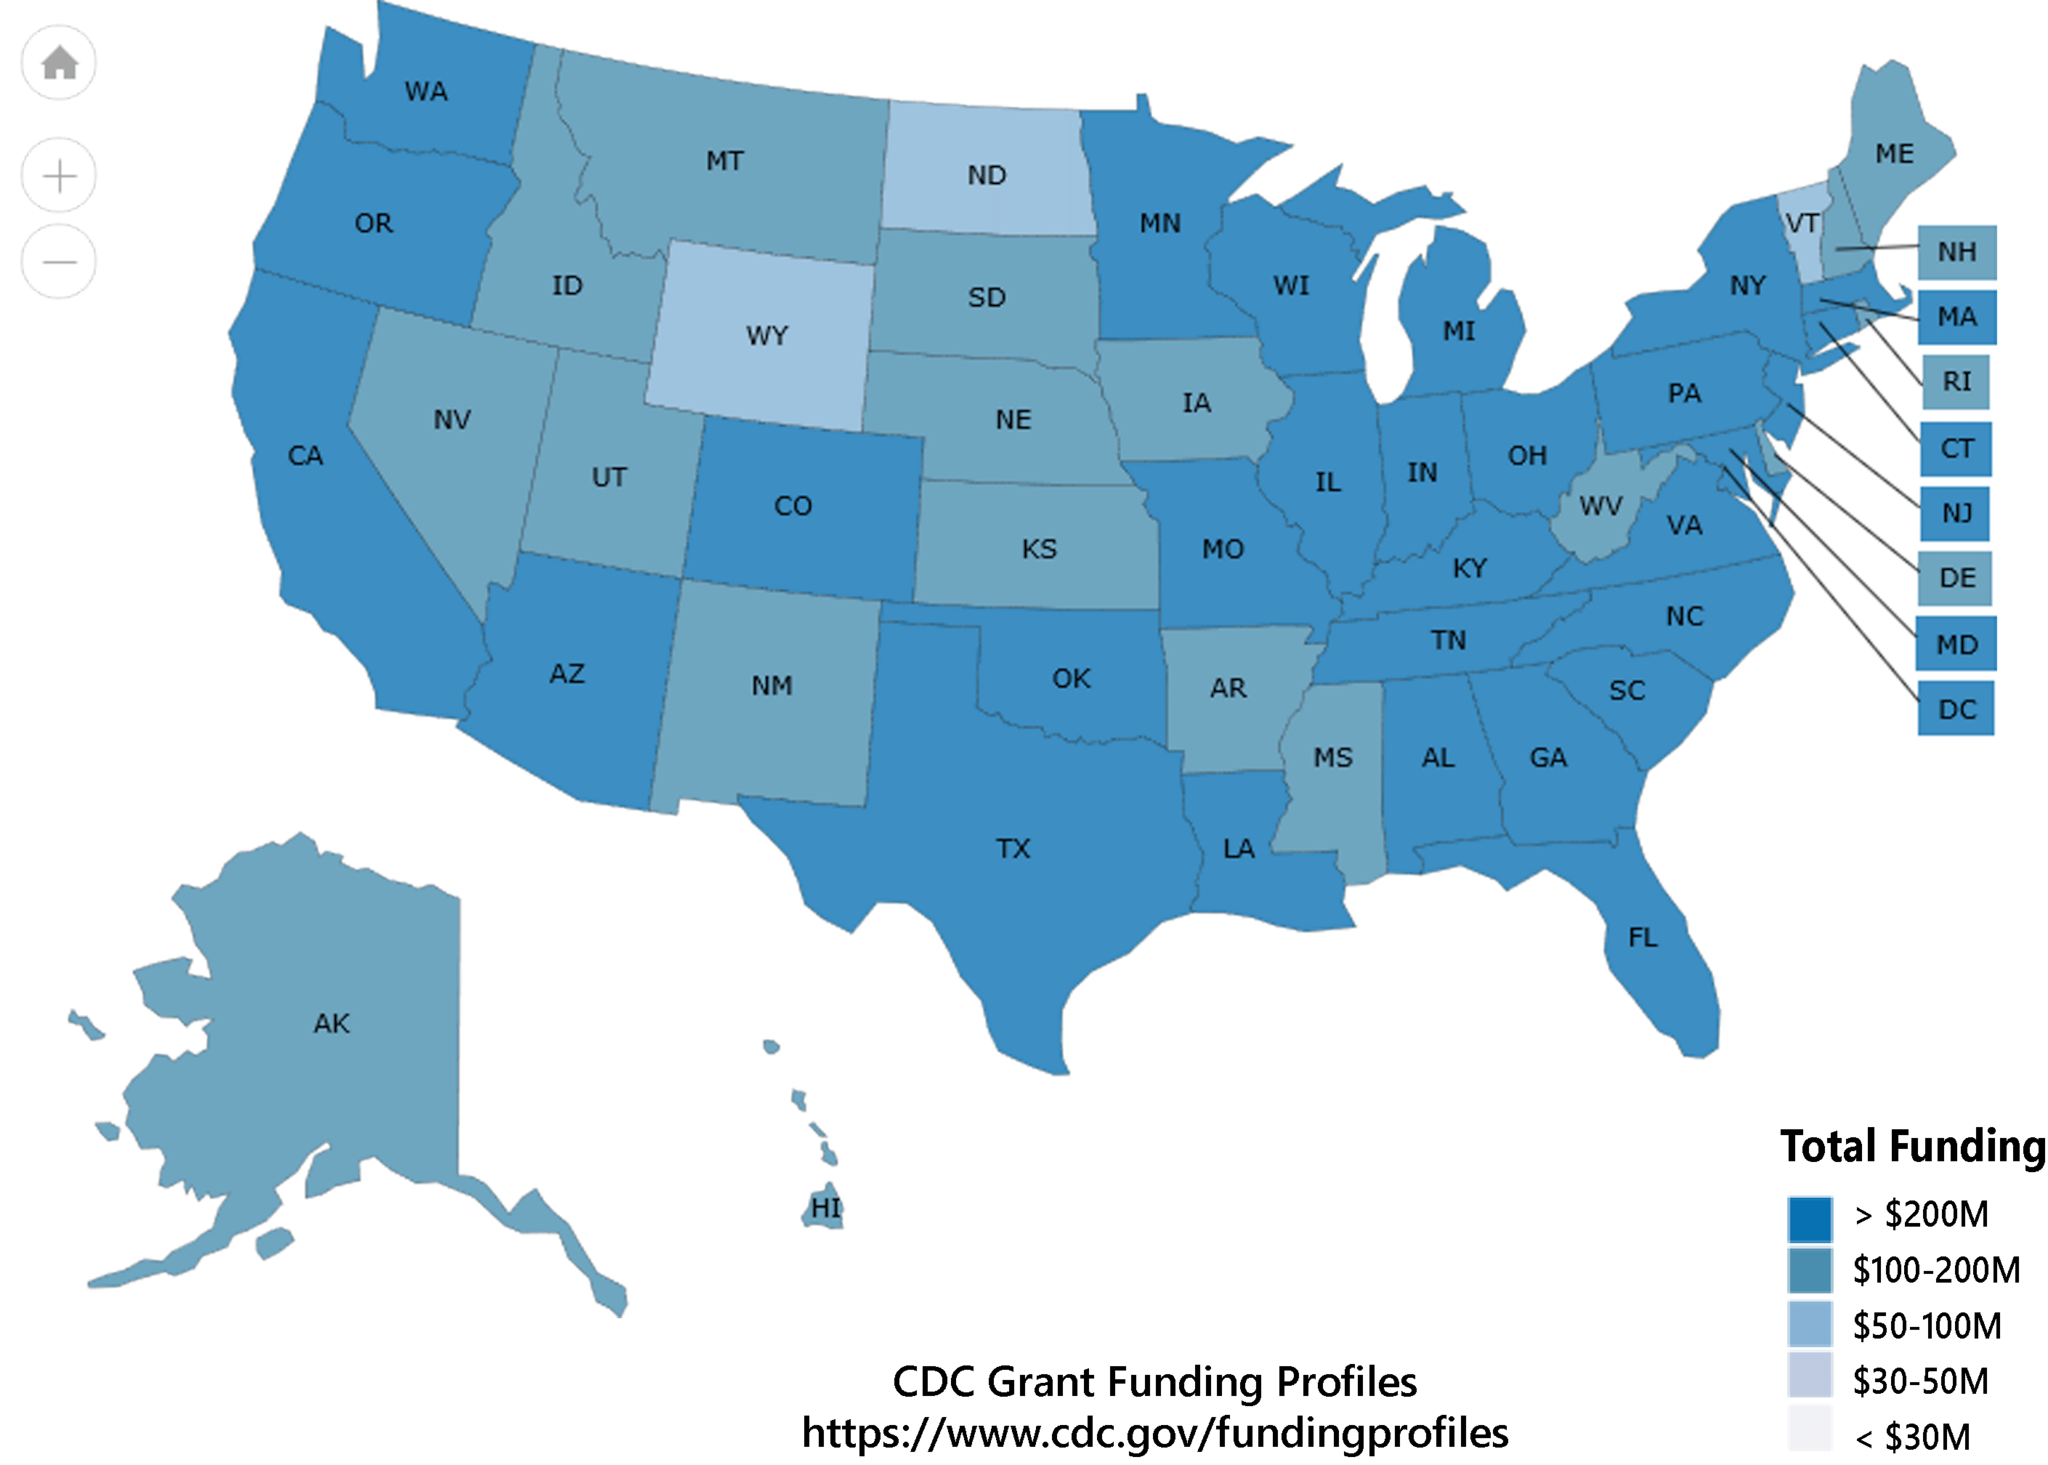 Map of Grant Funding By State for Fiscal Year 2020